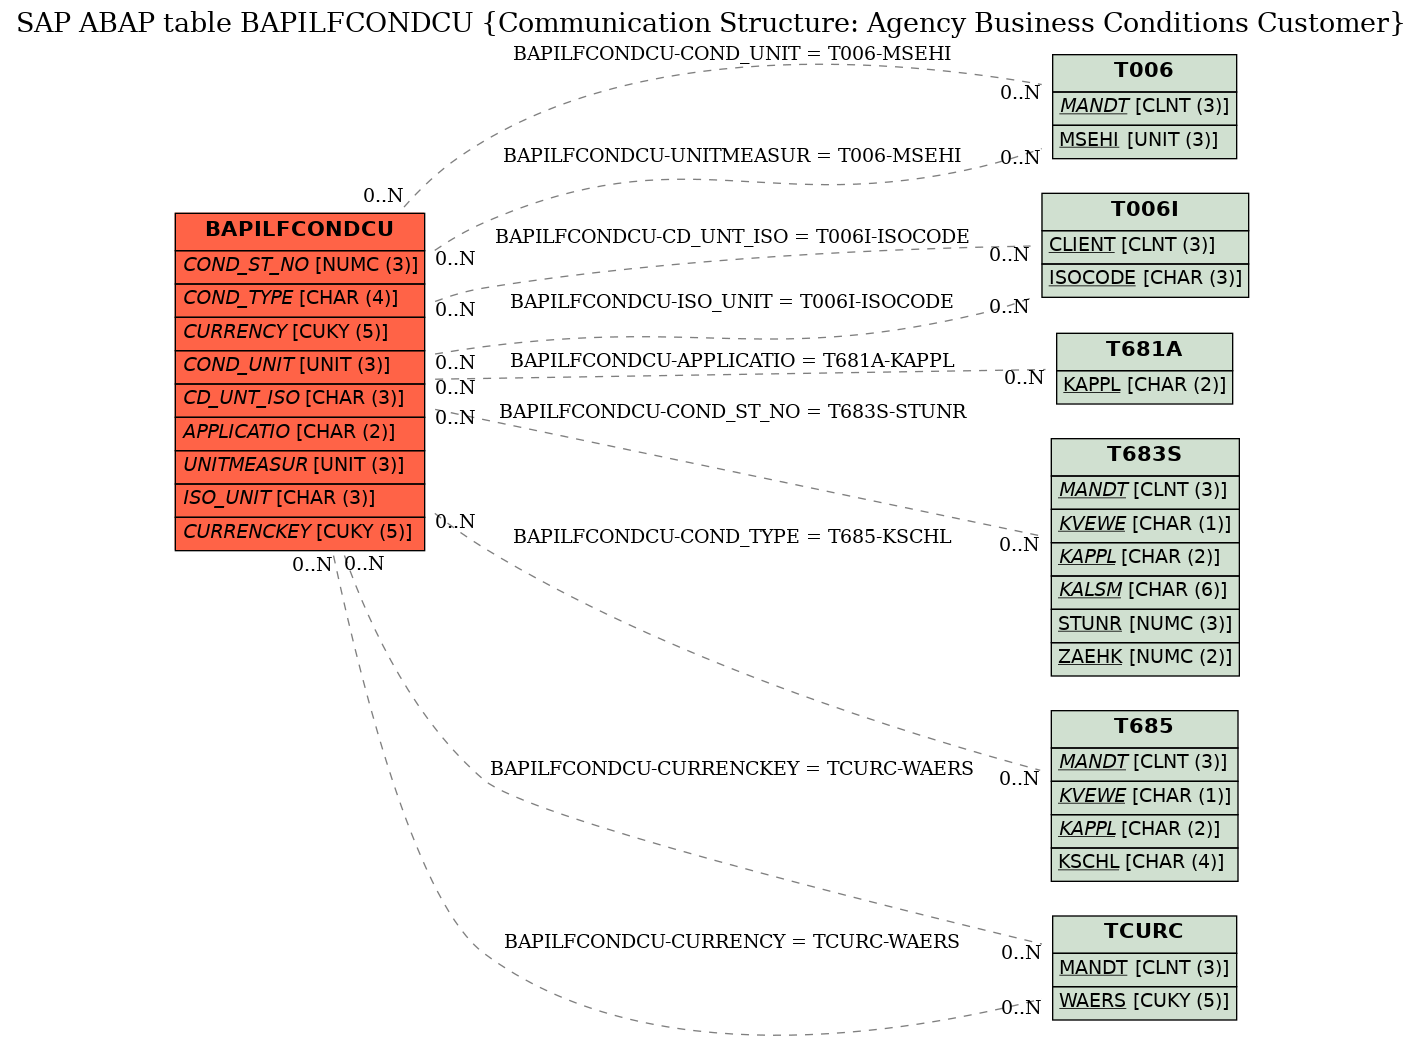 E-R Diagram for table BAPILFCONDCU (Communication Structure: Agency Business Conditions Customer)